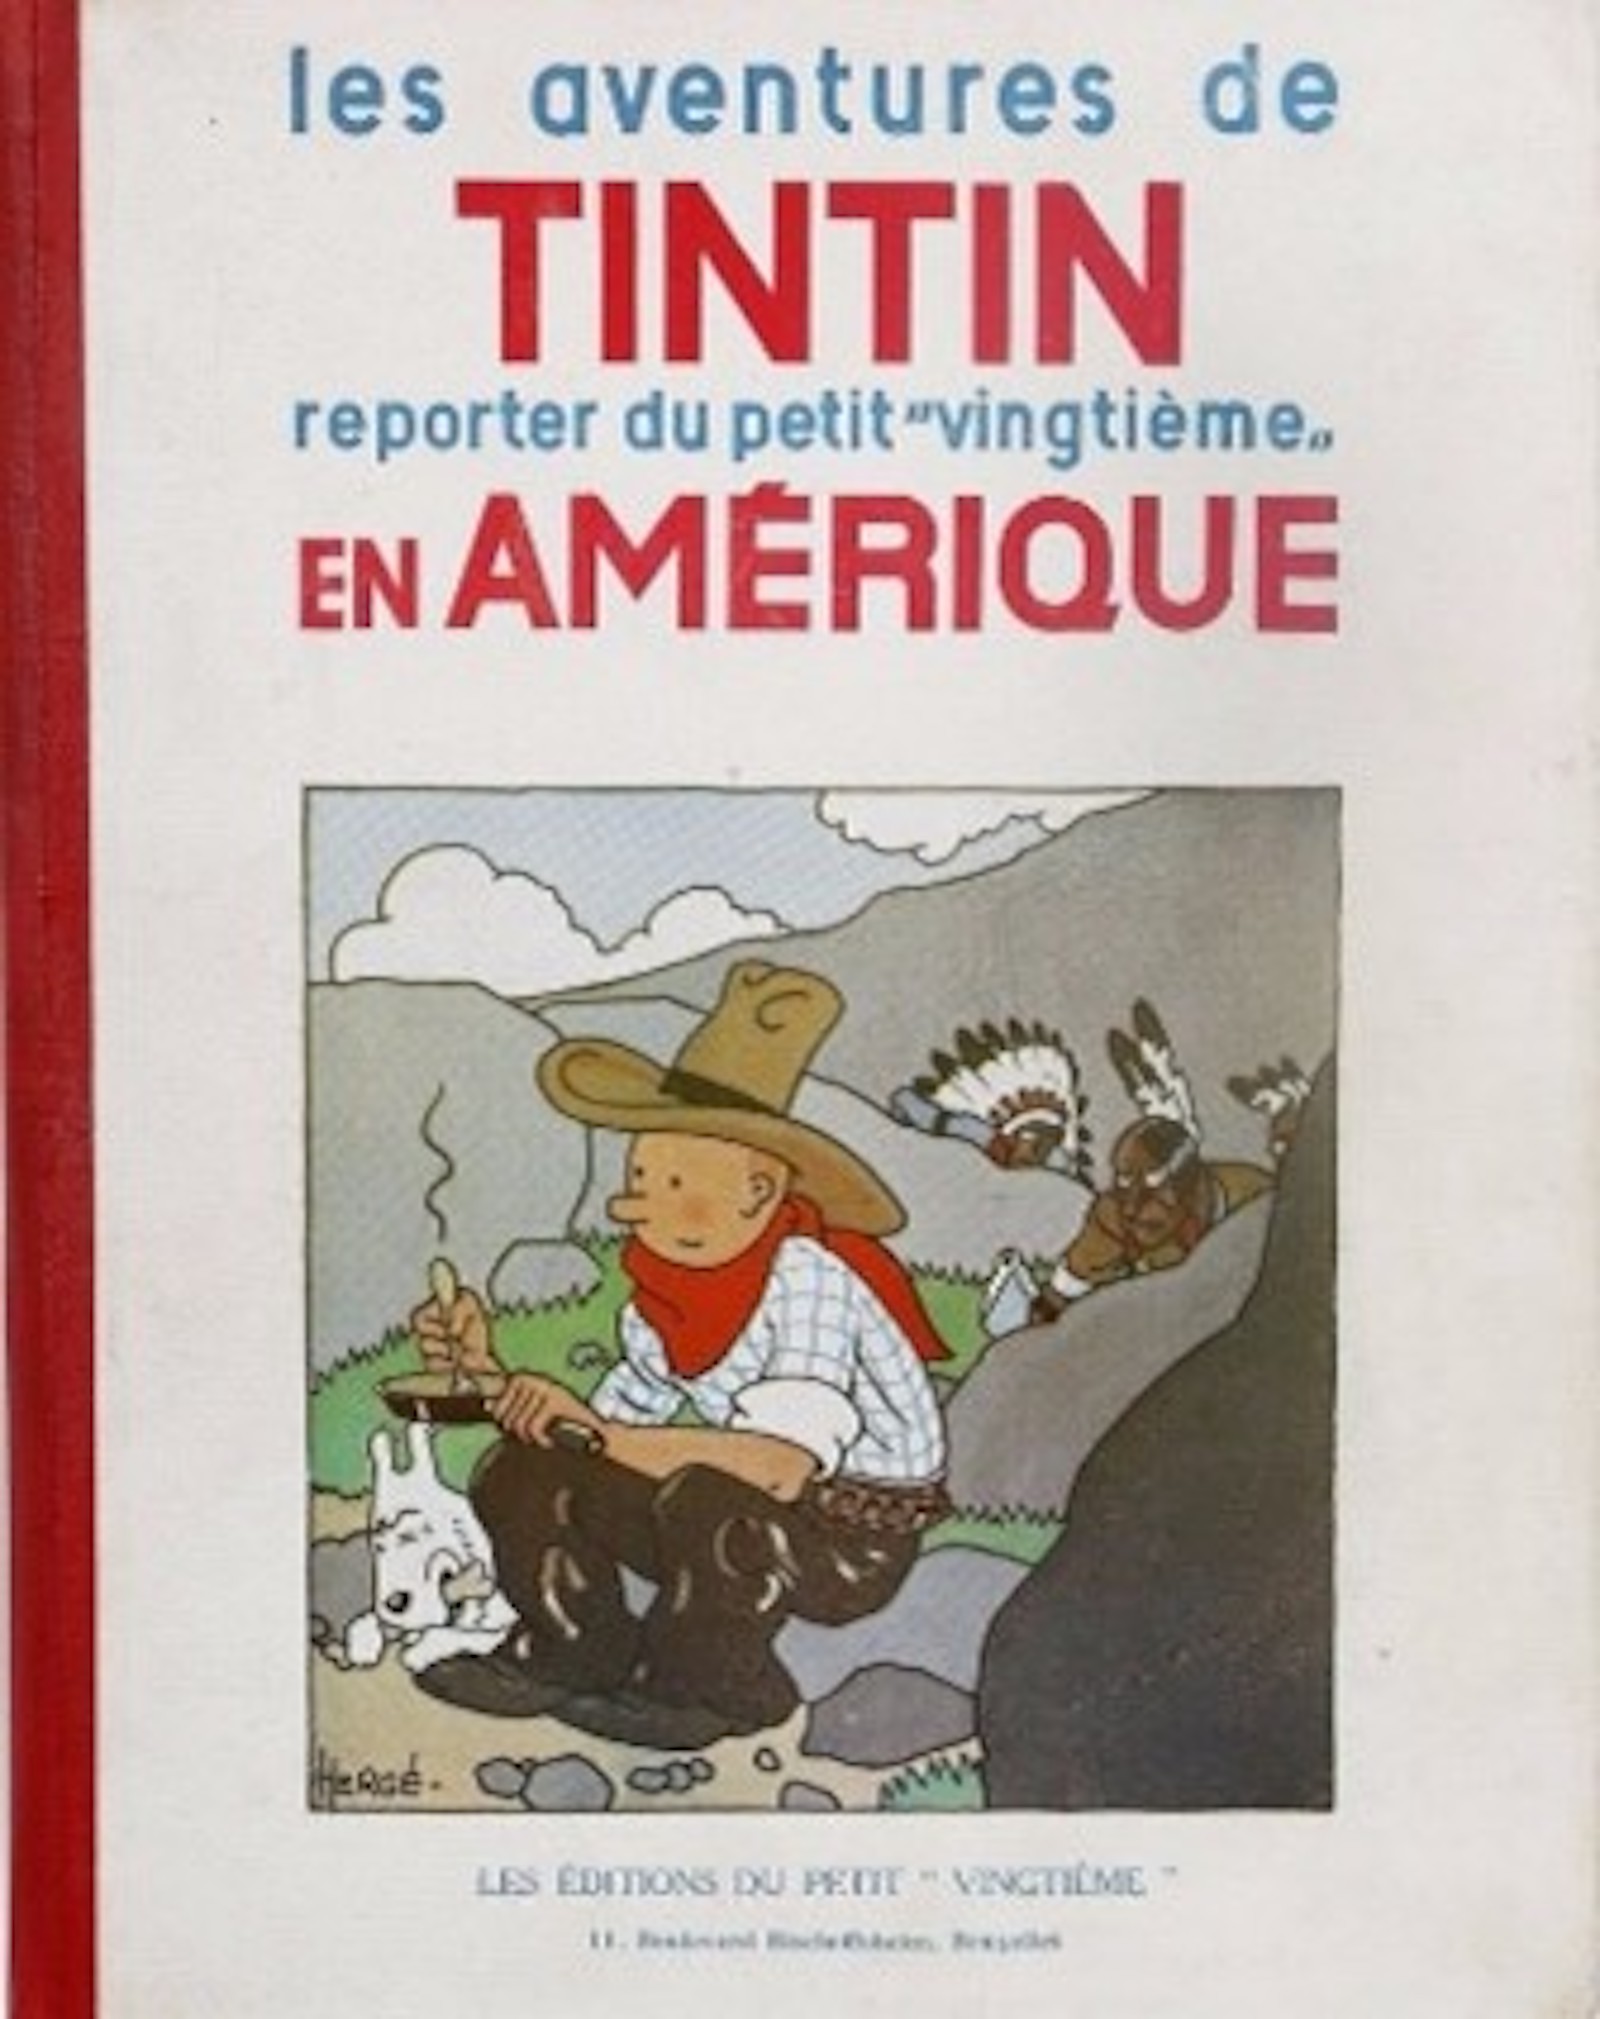 Tintin's Hergé, Yslaire, and Uderzo Illustrations to Auction